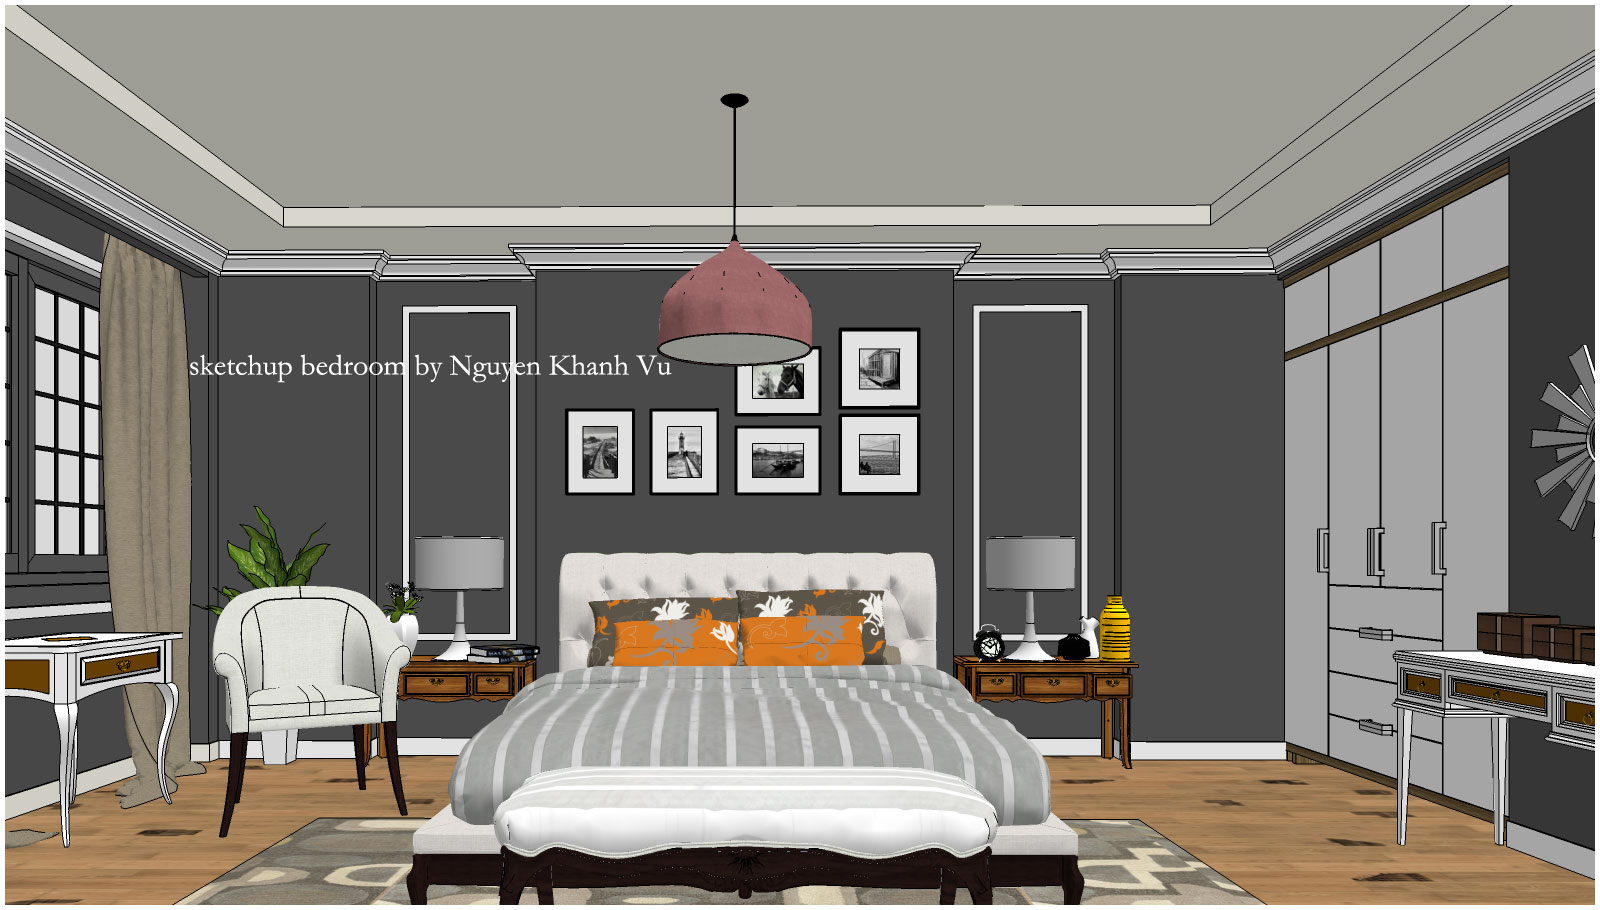 SKETCHUP TEXTURE: FREE 3D MODEL BEDROOM #5 VRAY 1.6 setting